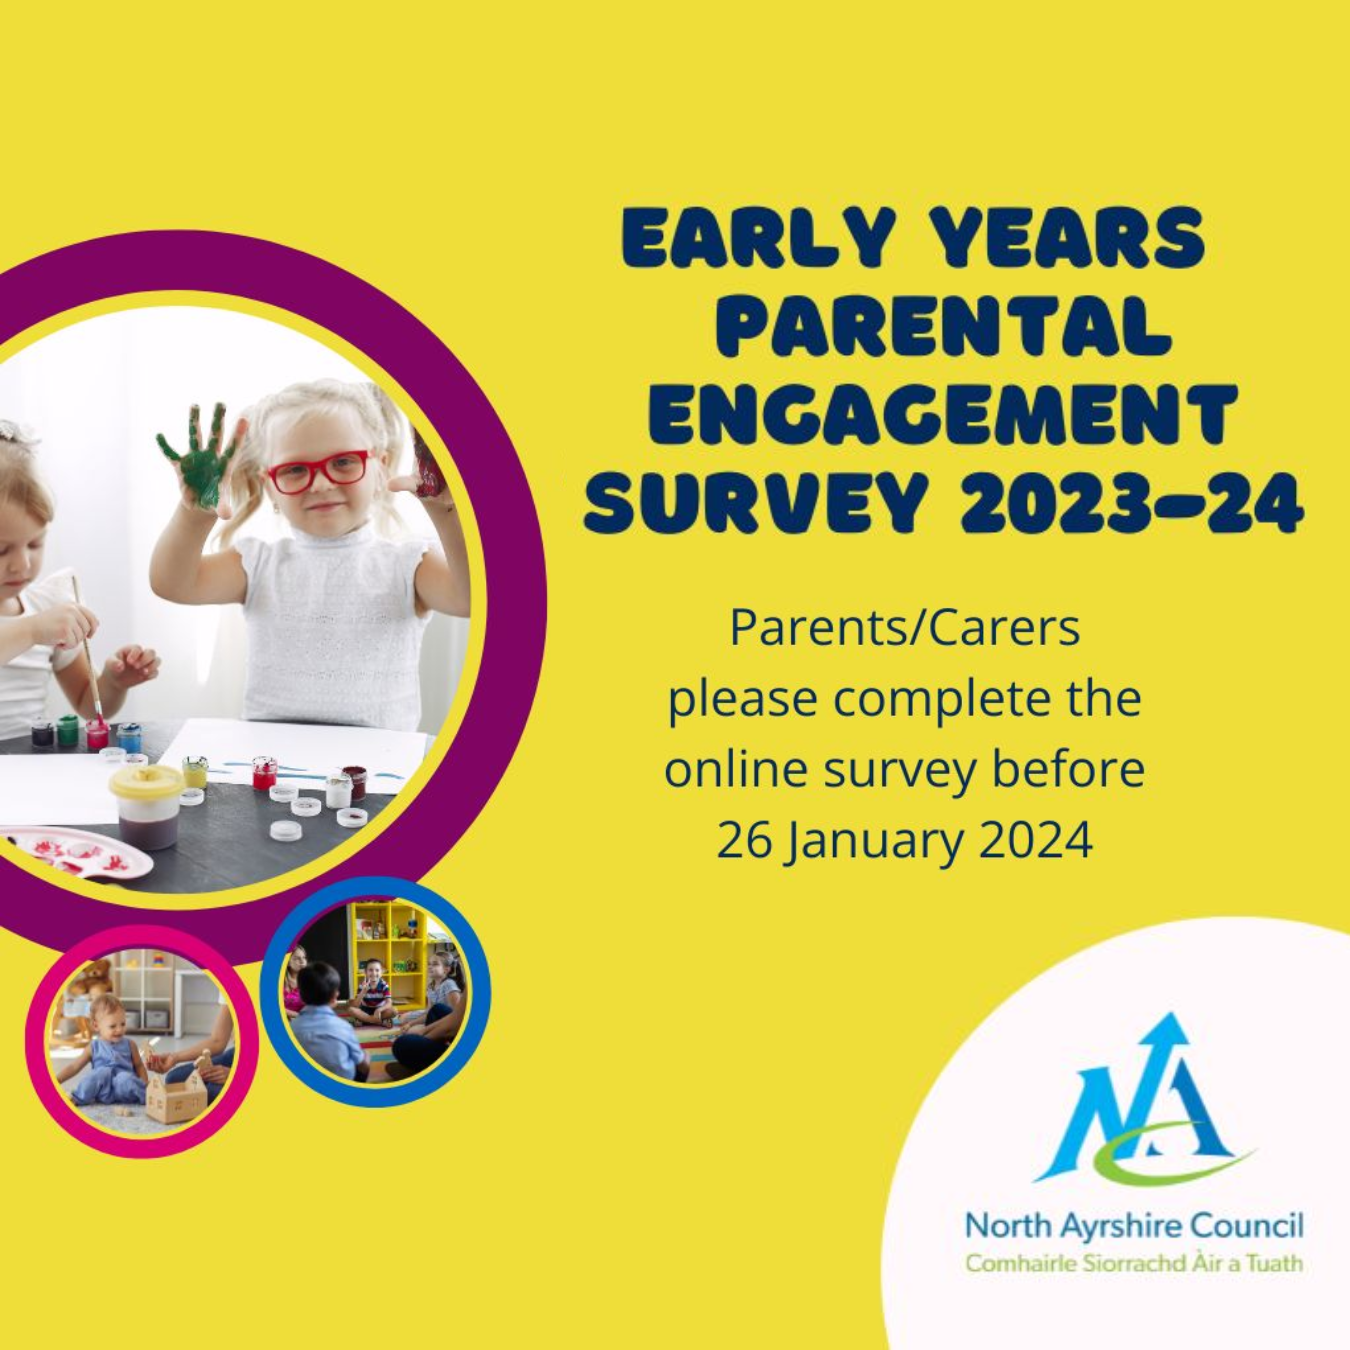 Decorative graphic with toddlers and infants with text reading Early Years Parental Engagement Survey 2023-24